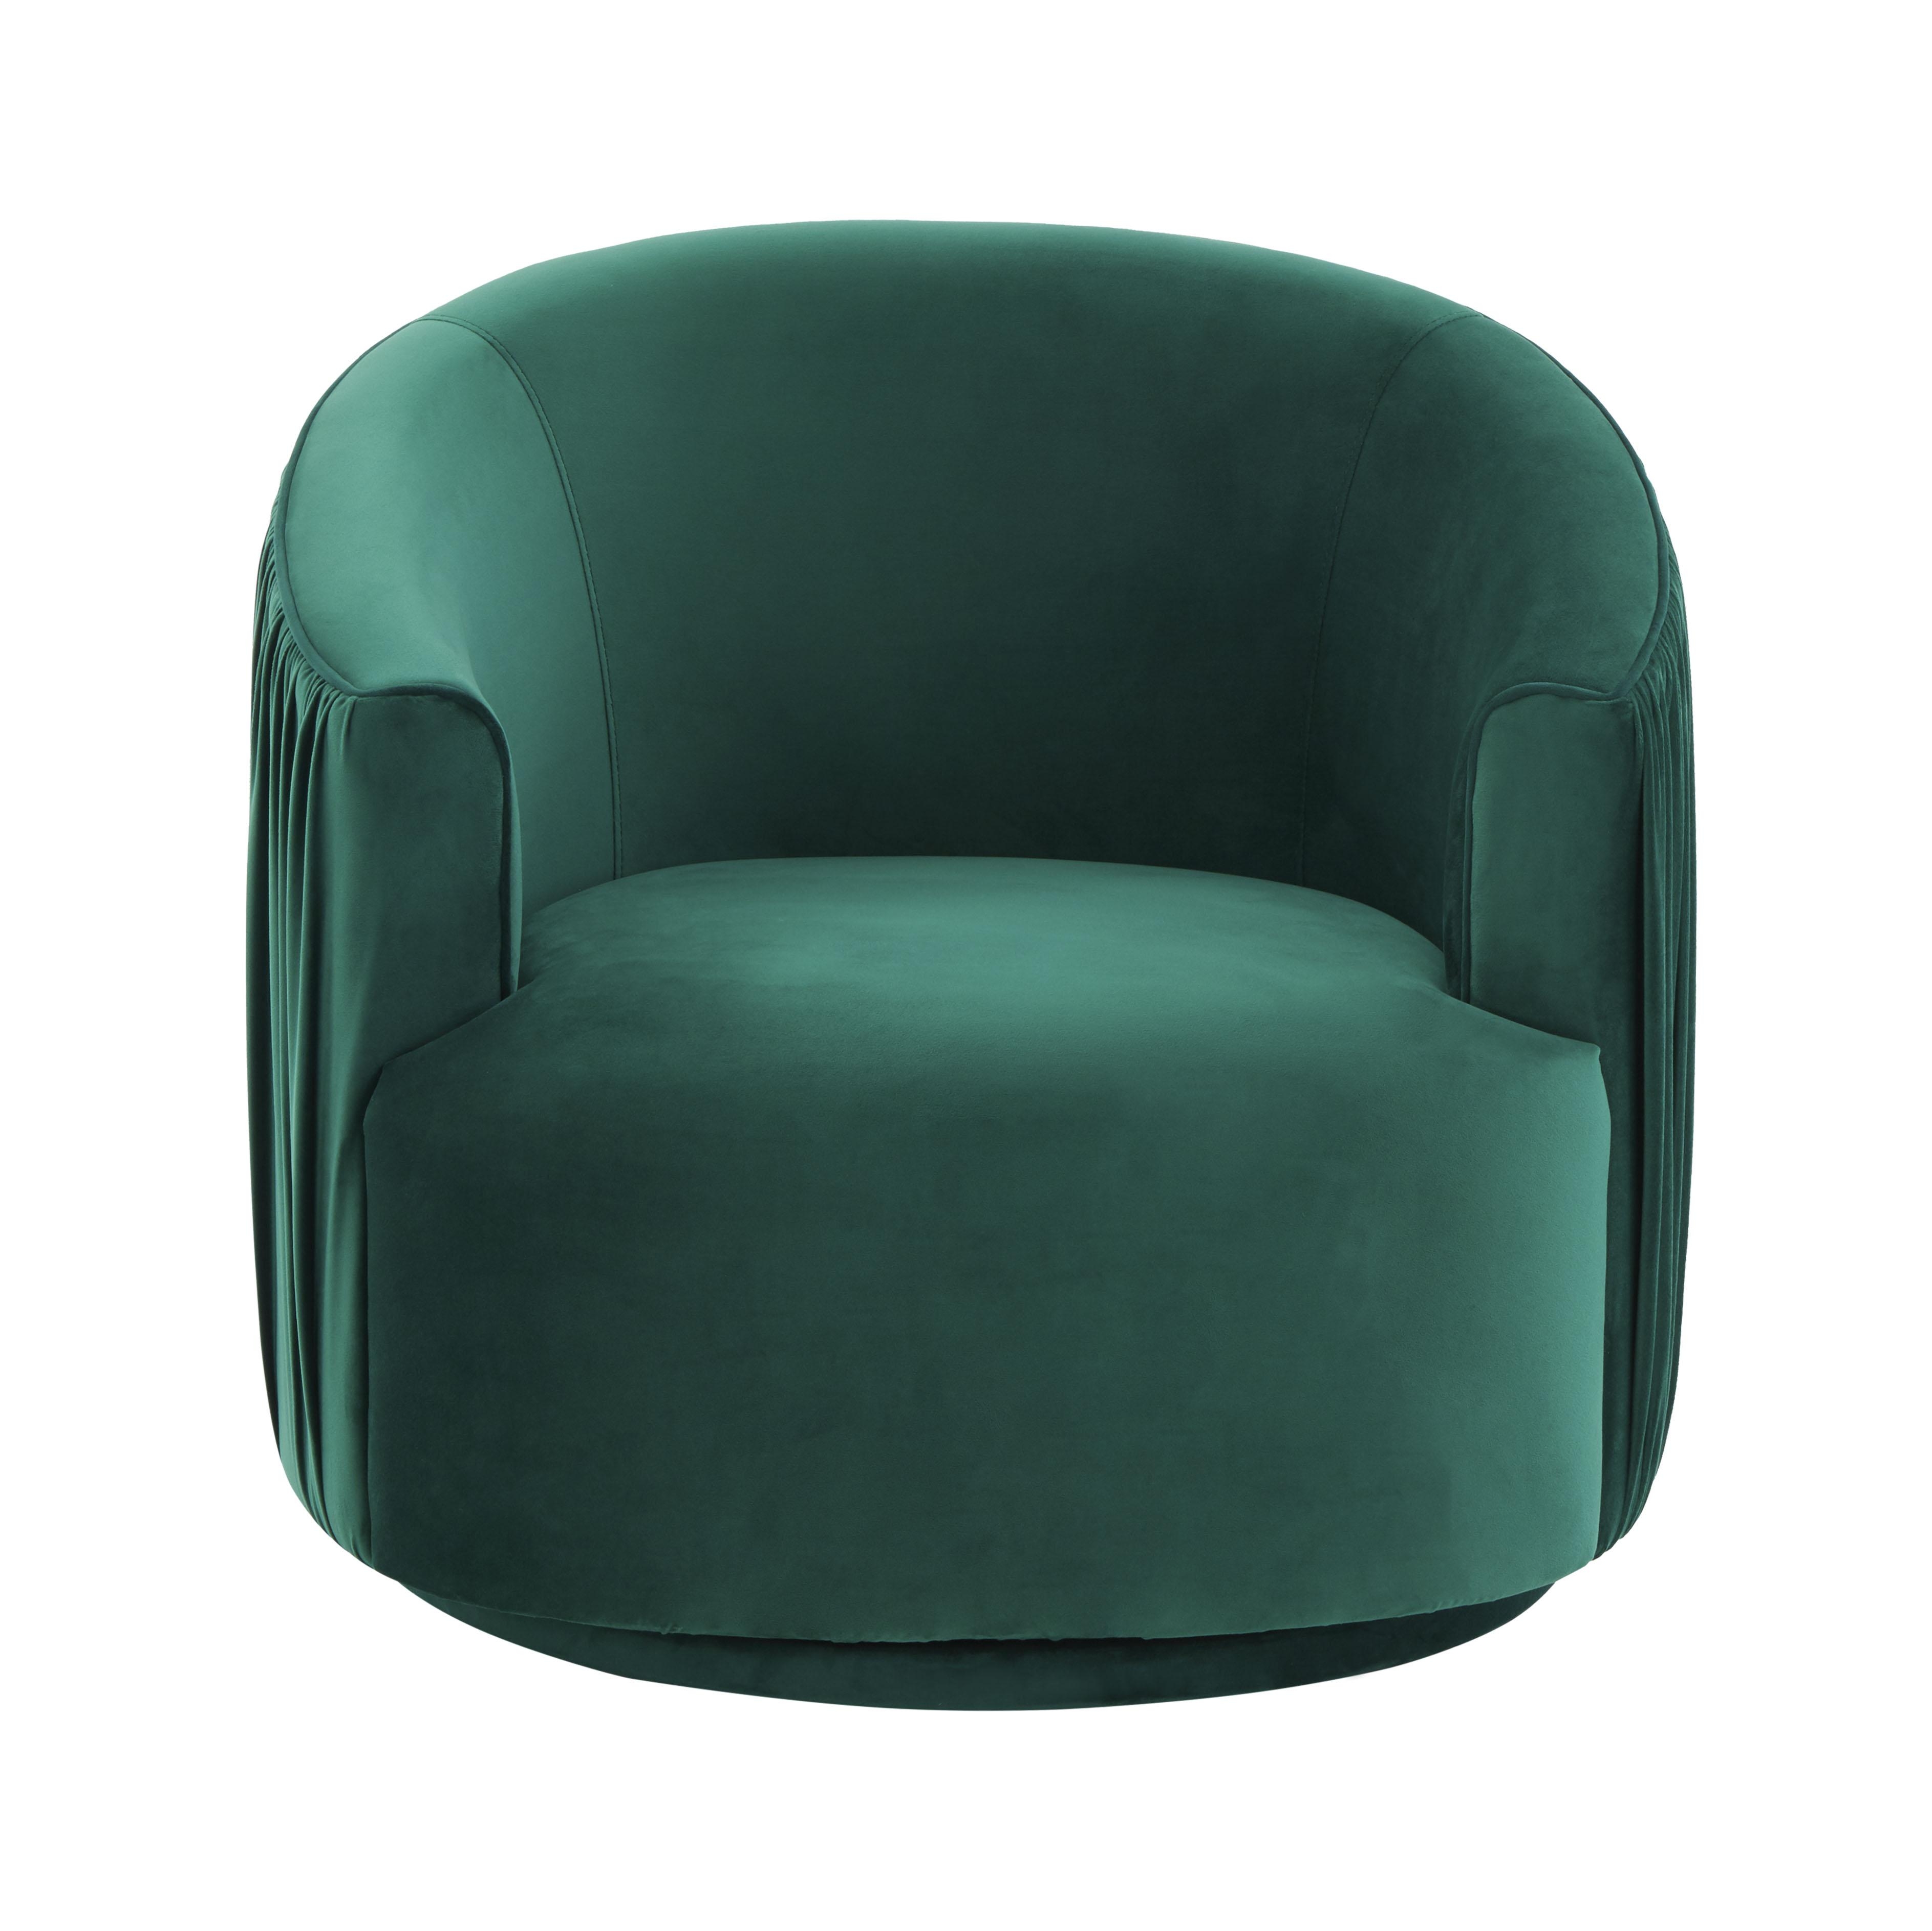 London Forest Green Pleated Swivel Chair - Image 1